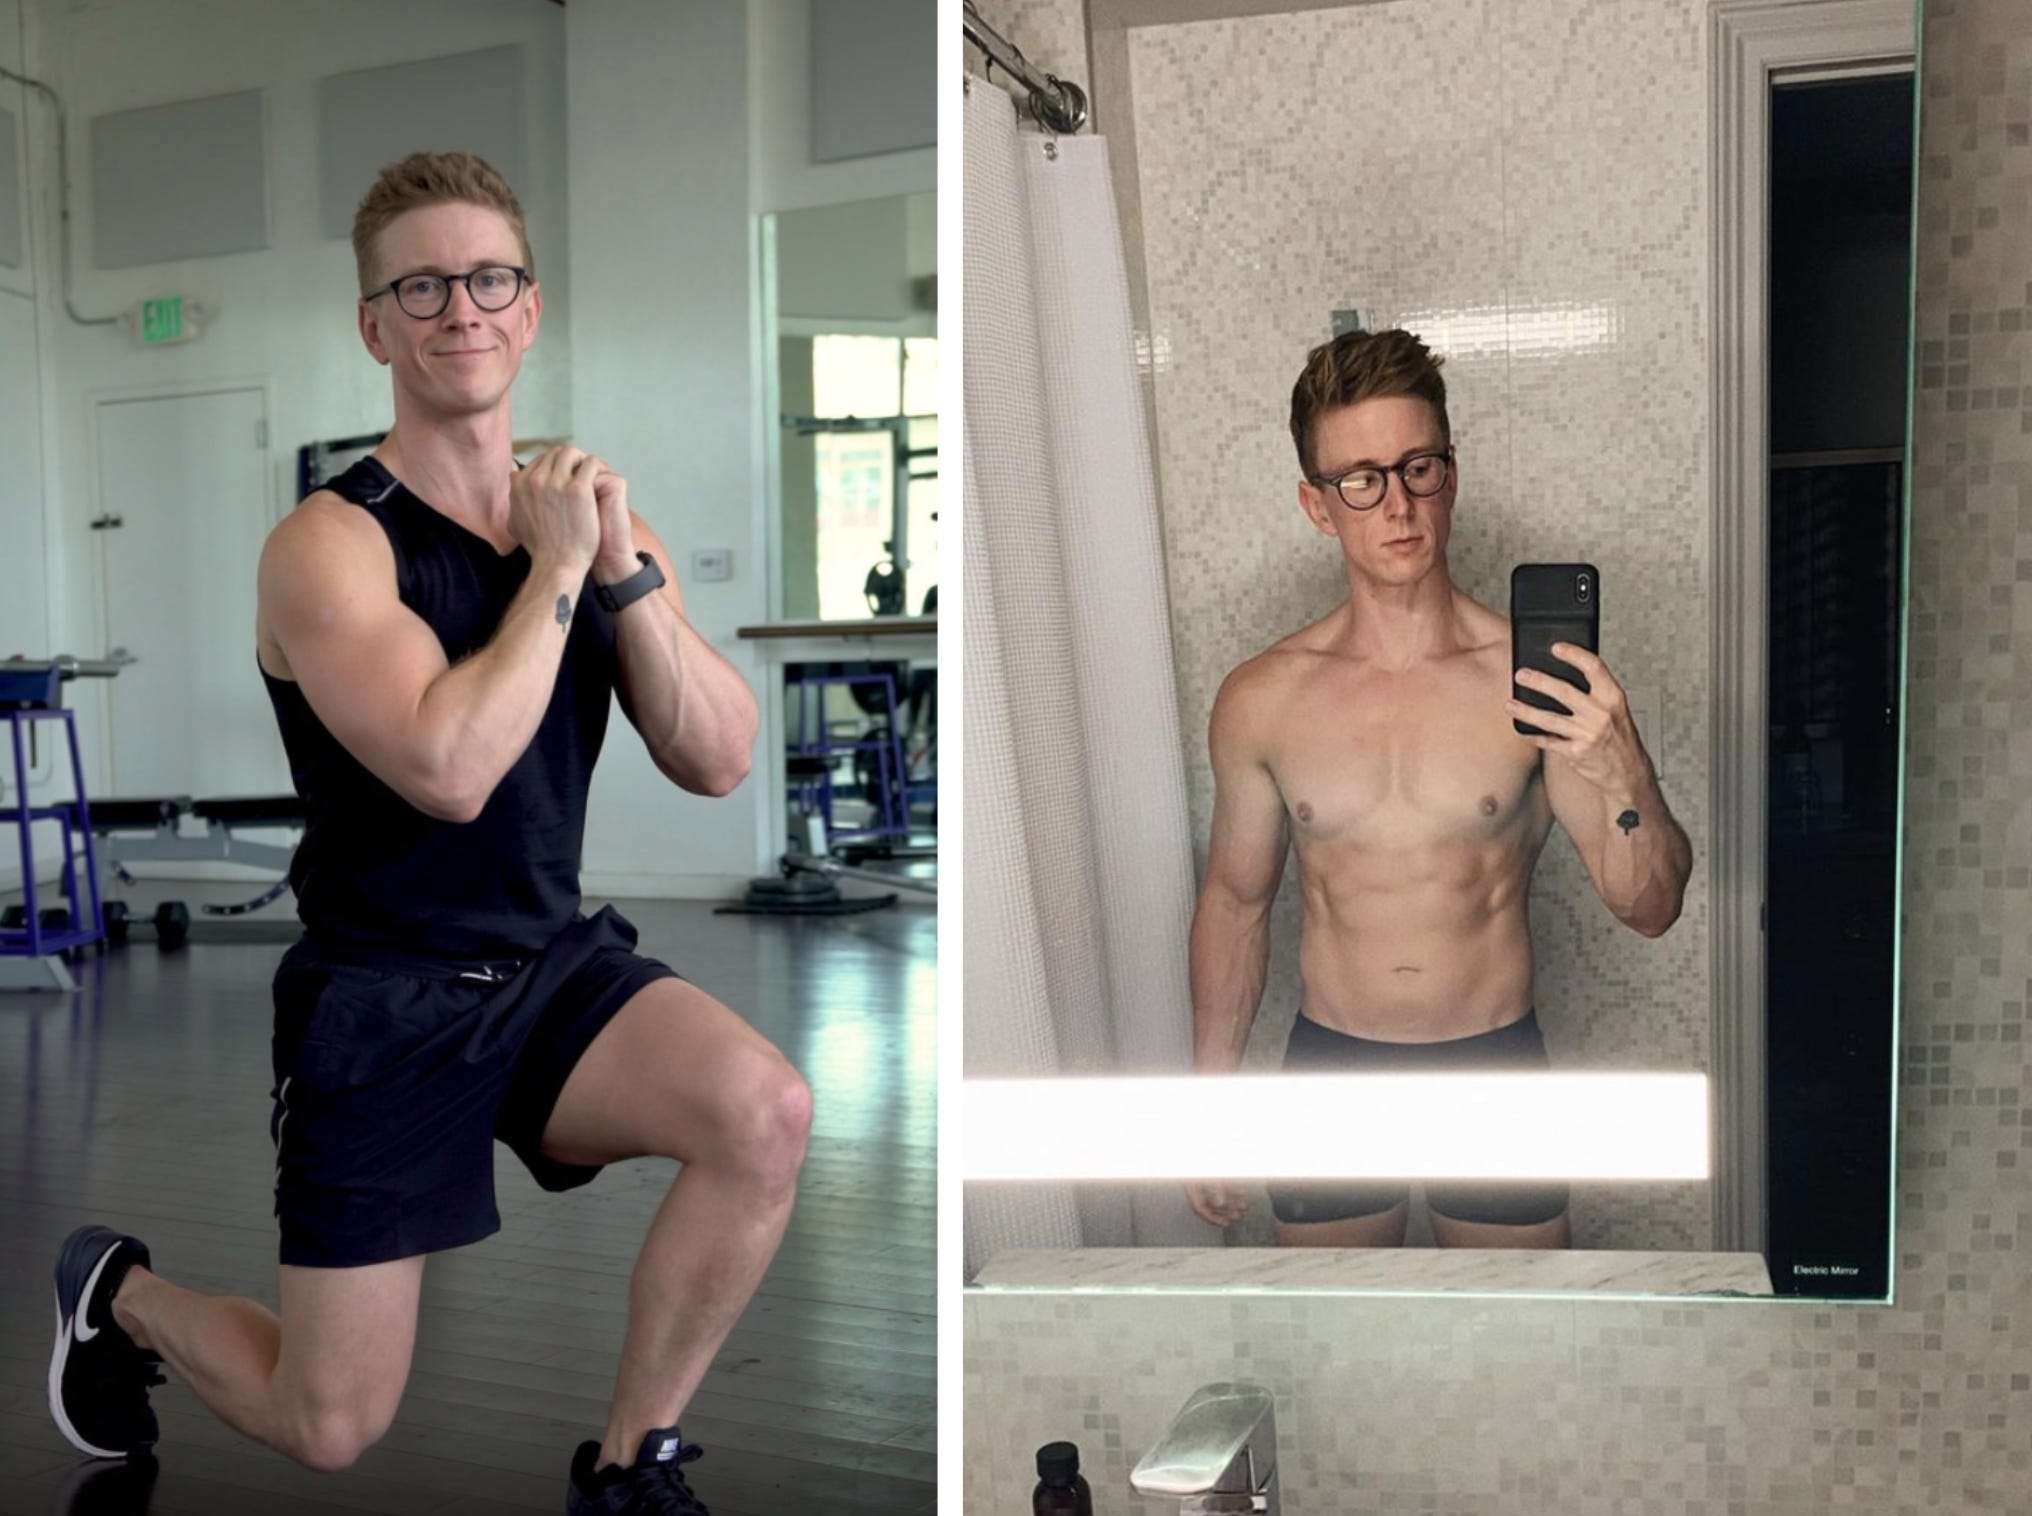 Youtube Royalty Tyler Oakley Says Reality Tv Took Him In A Completely New Direction Leading To A Body Transformation And A New Igtv Show ?imgsize=228368